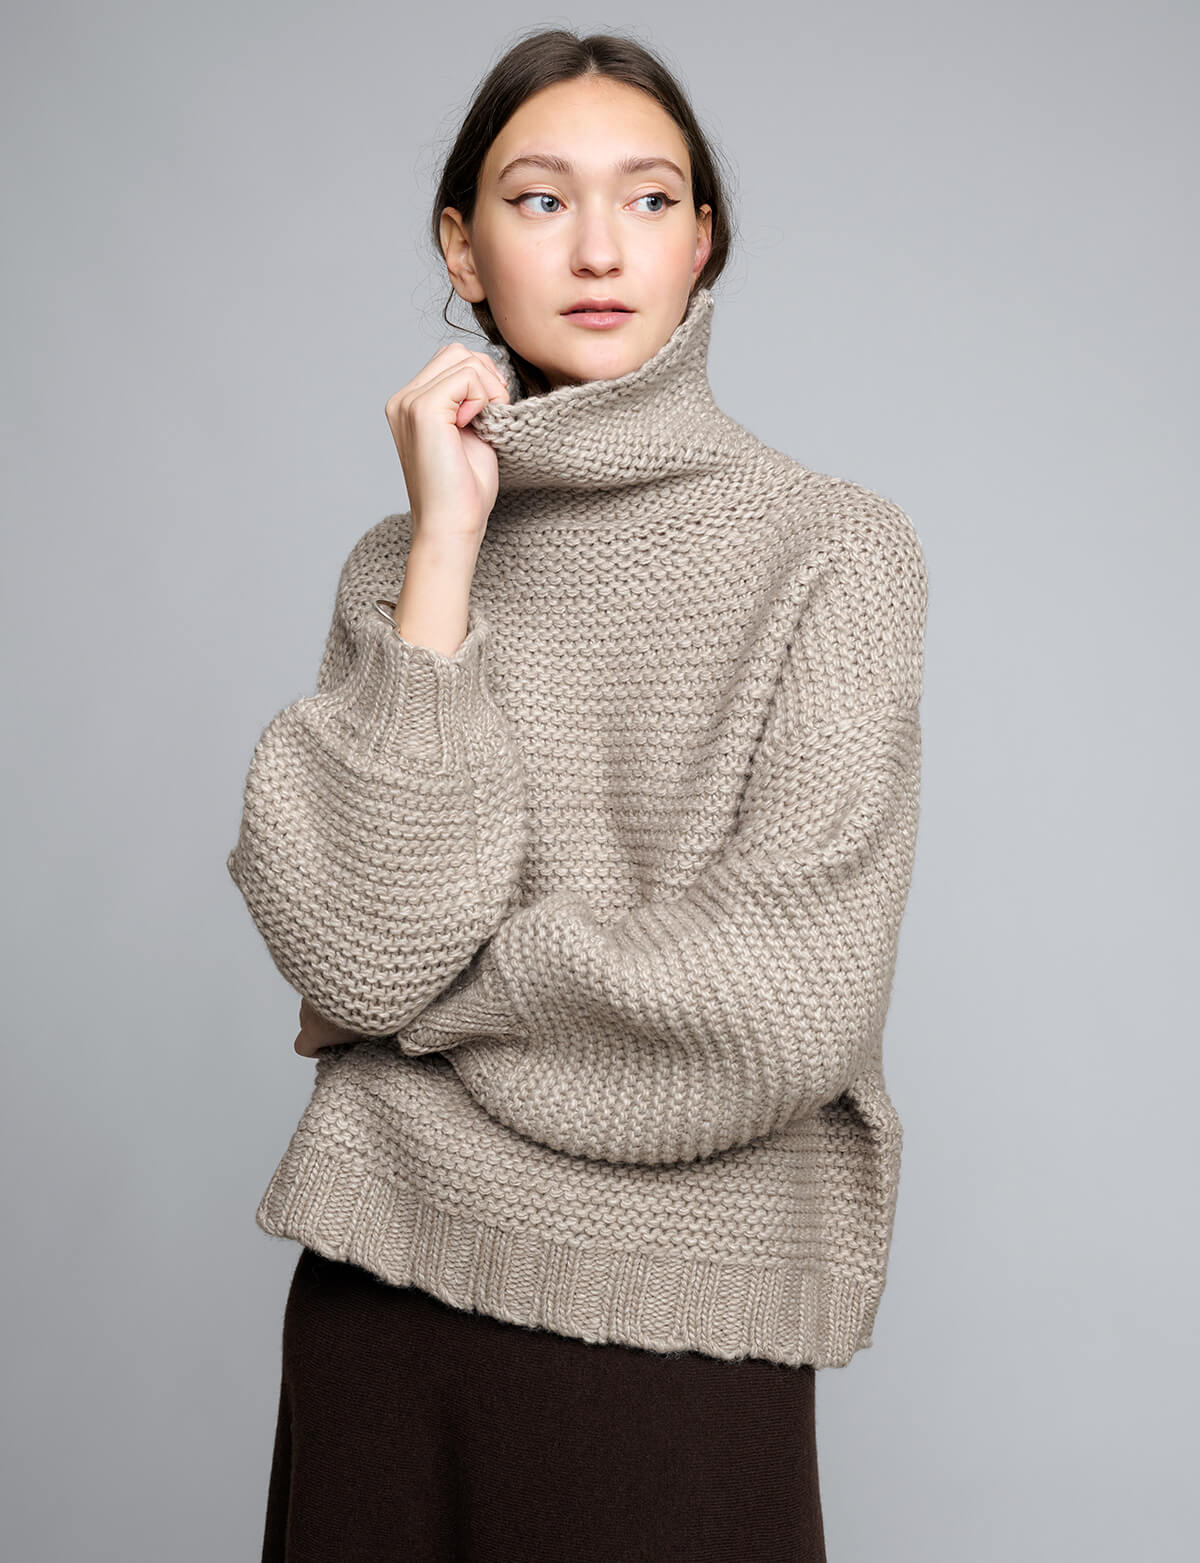 Shop Sweaters | Explore Cardigans, Sweaters, Jumpers, & More